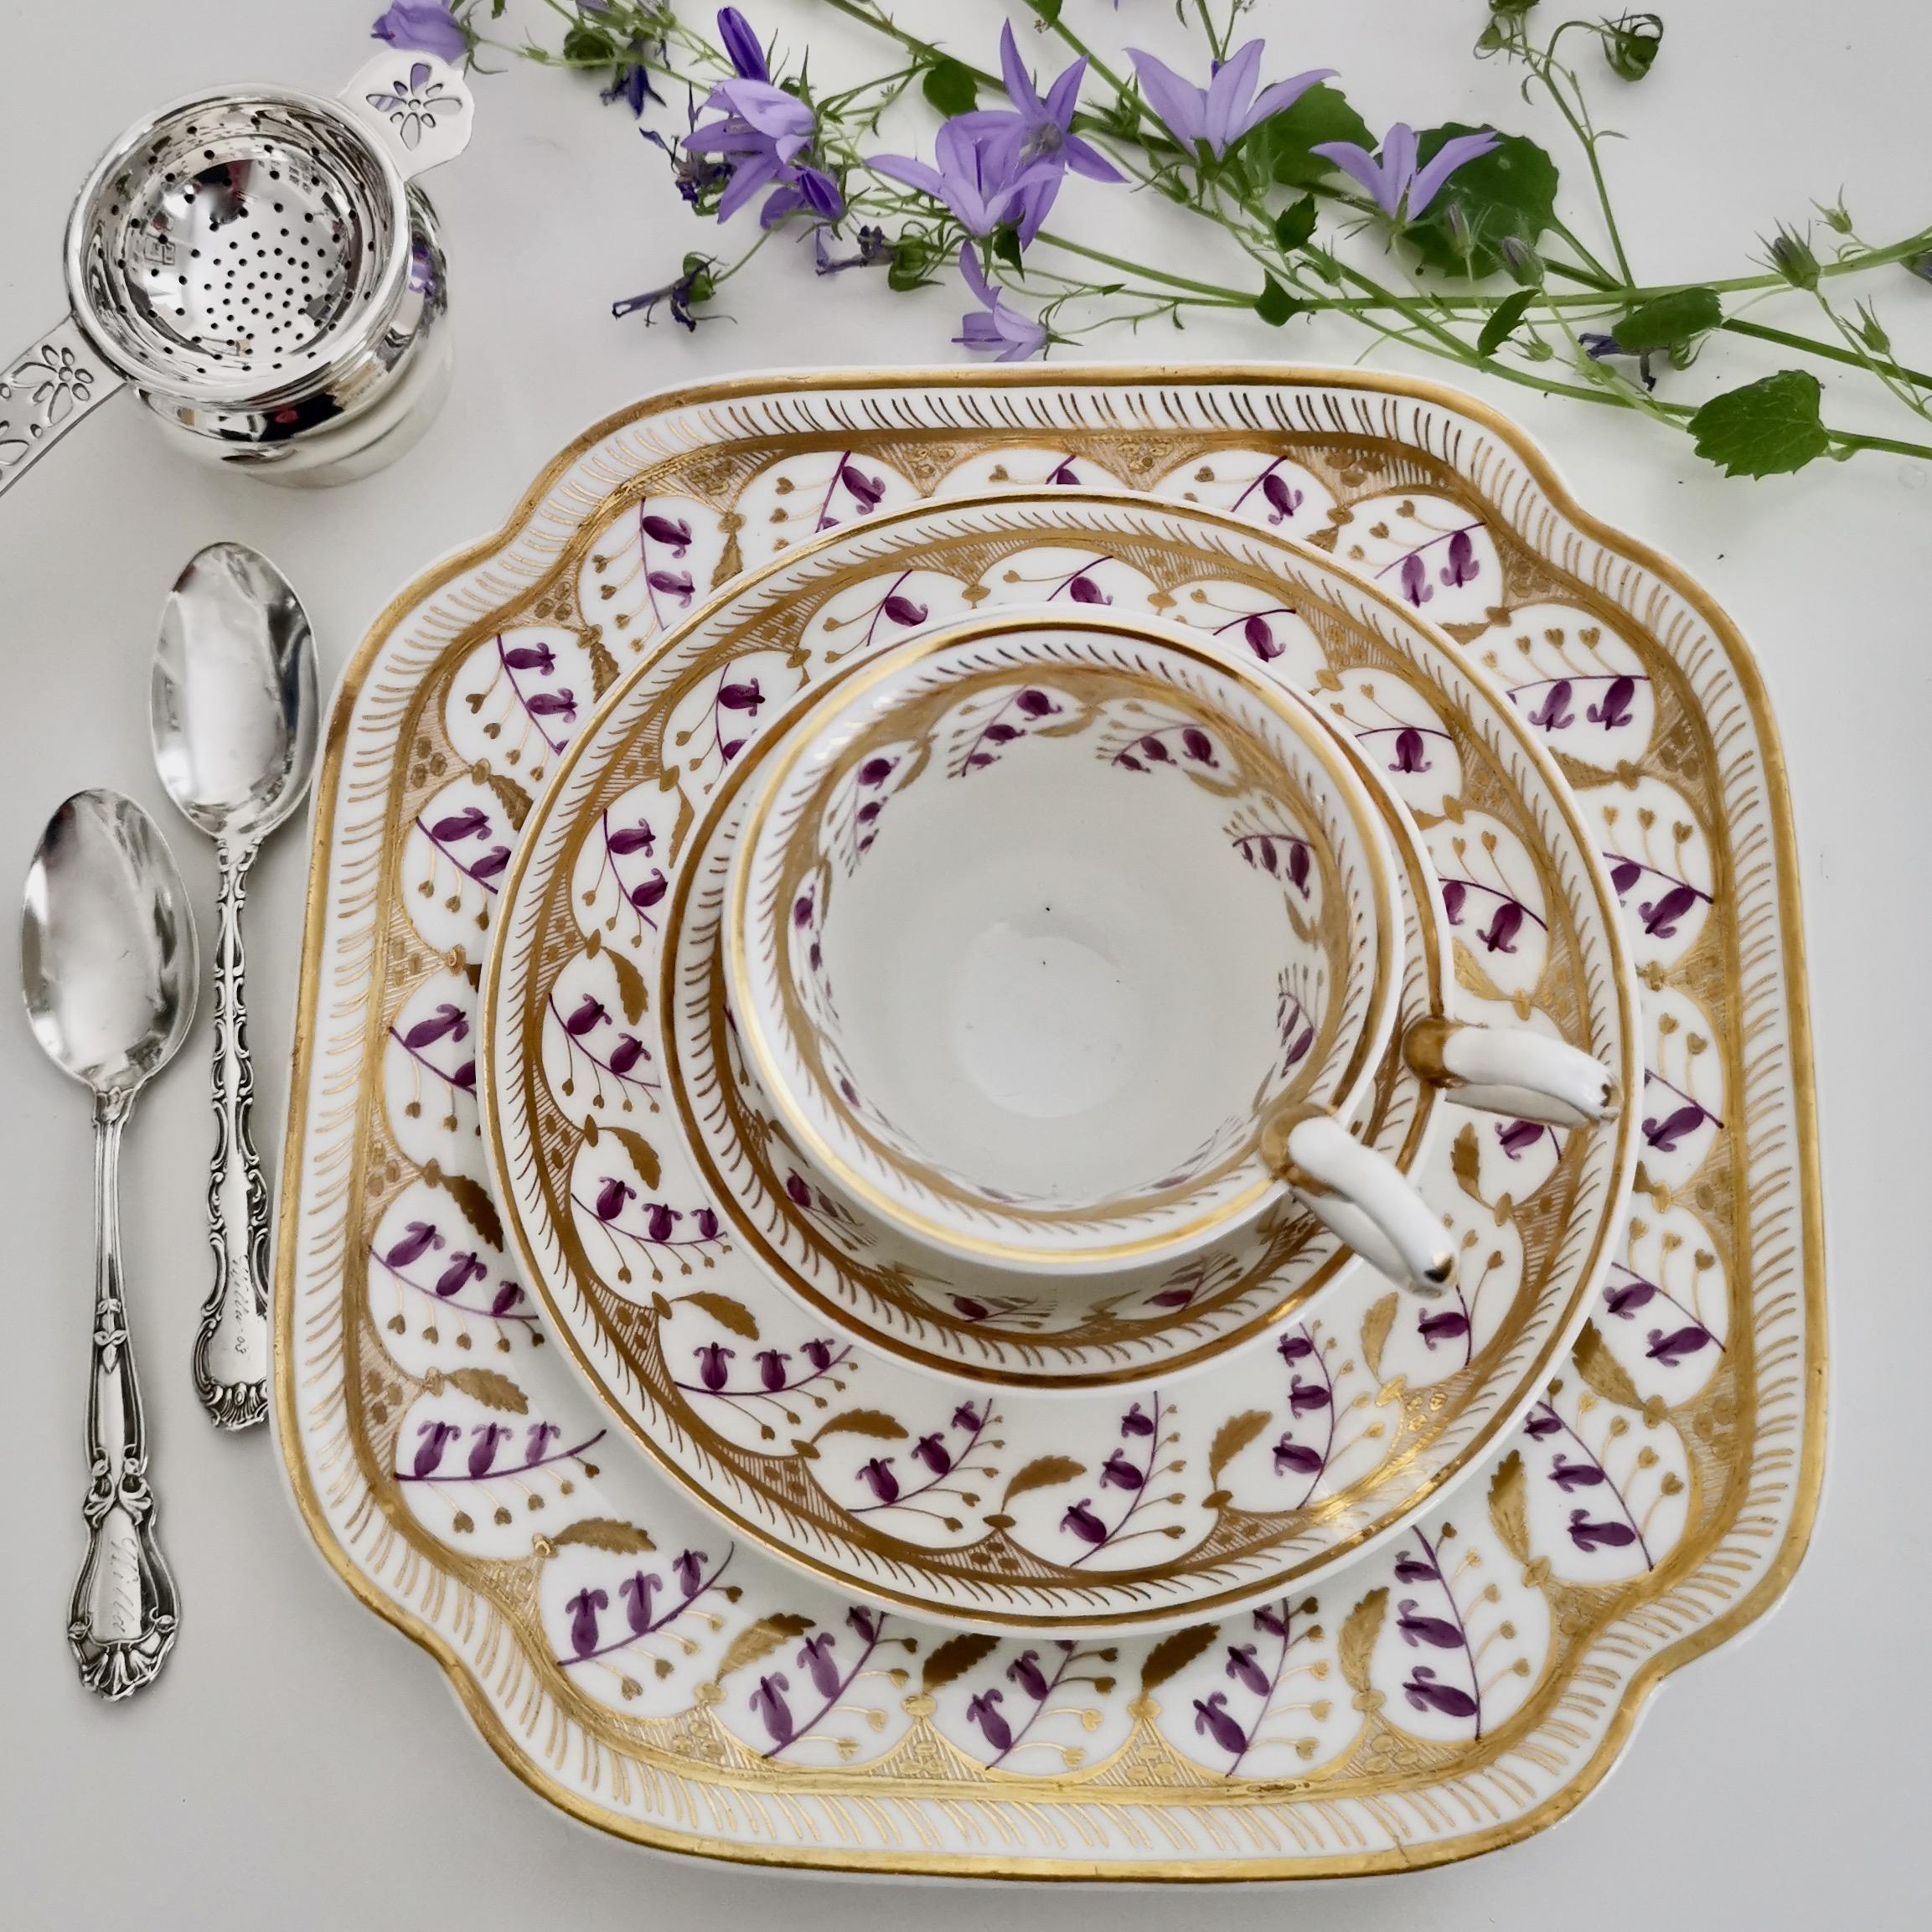 This is a beautiful cake plate made by Spode in circa 1826, which was the Regency period. The plate is made of felspar porcelain and decorated in the Harebell pattern and it matches three trios that I have in a separate listing (see last